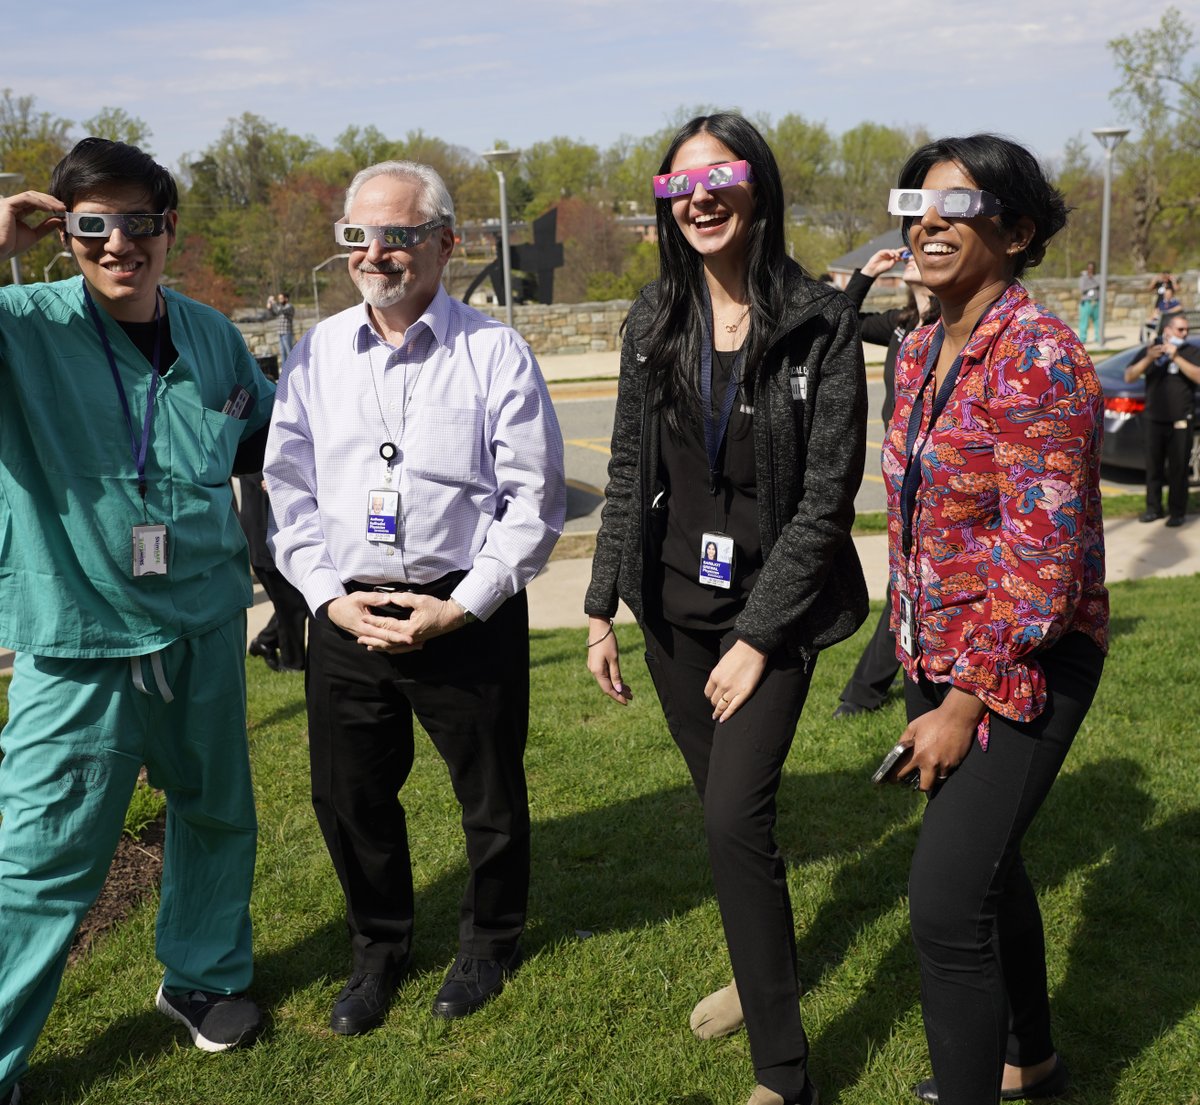 Some staff, patients and visitors at the @NIHClinicalCntr took a few moments to step outside yesterday and experience the solar eclipse. Of course, we all wore the proper eye protection!